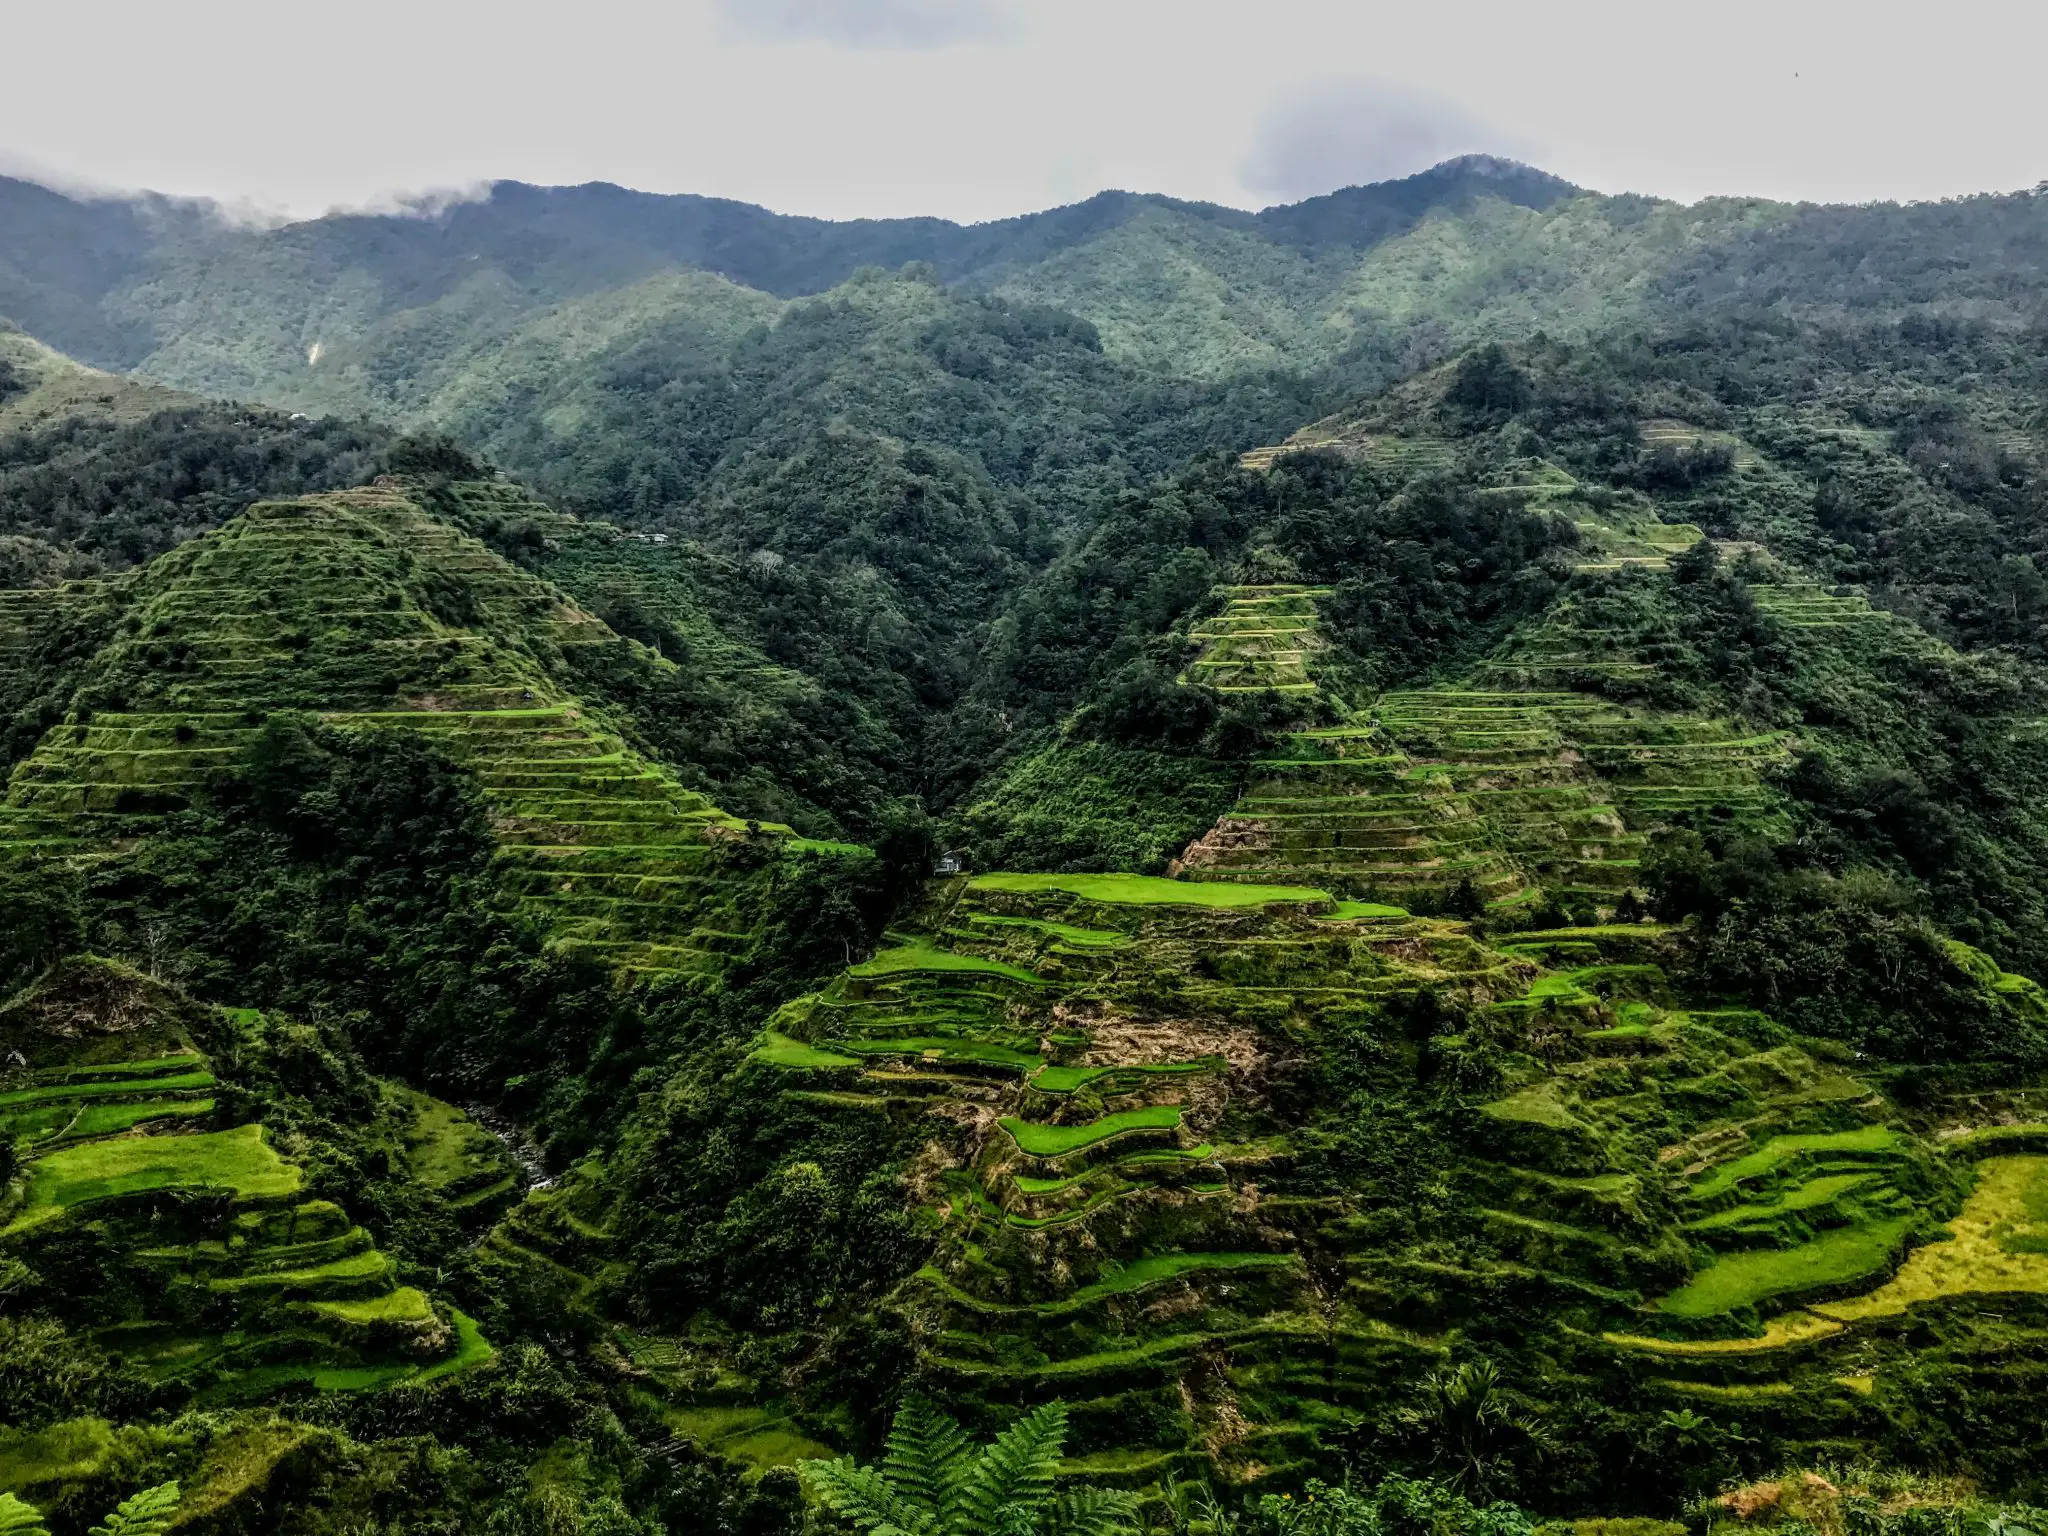 UNESCO-listed Ifugao rice terraces in North Luzon